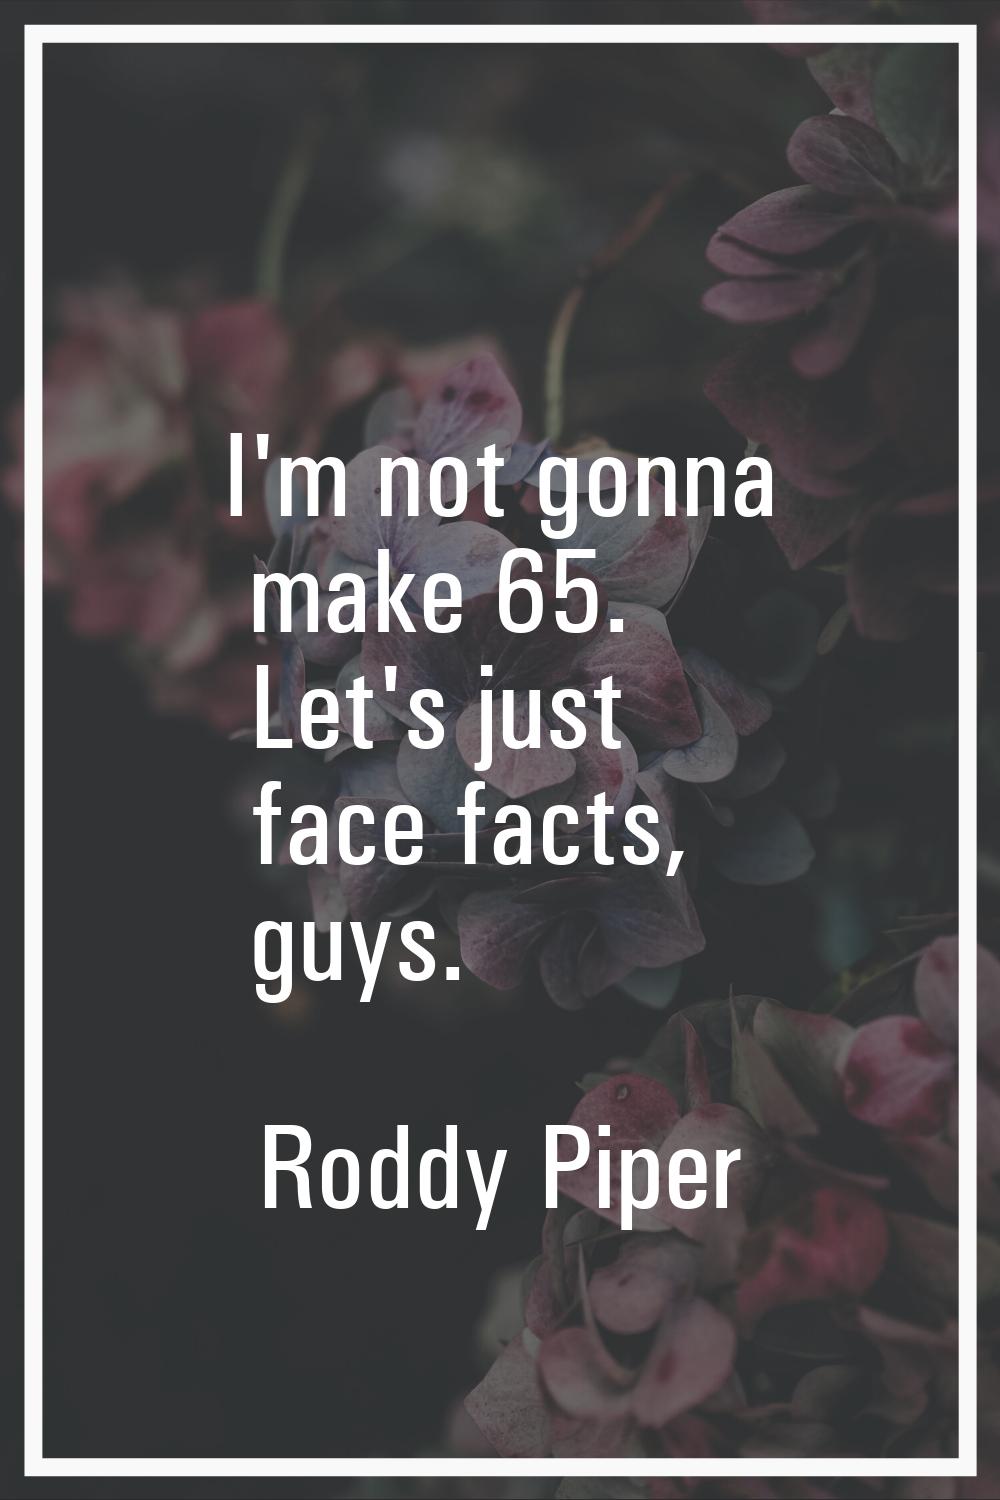 I'm not gonna make 65. Let's just face facts, guys.